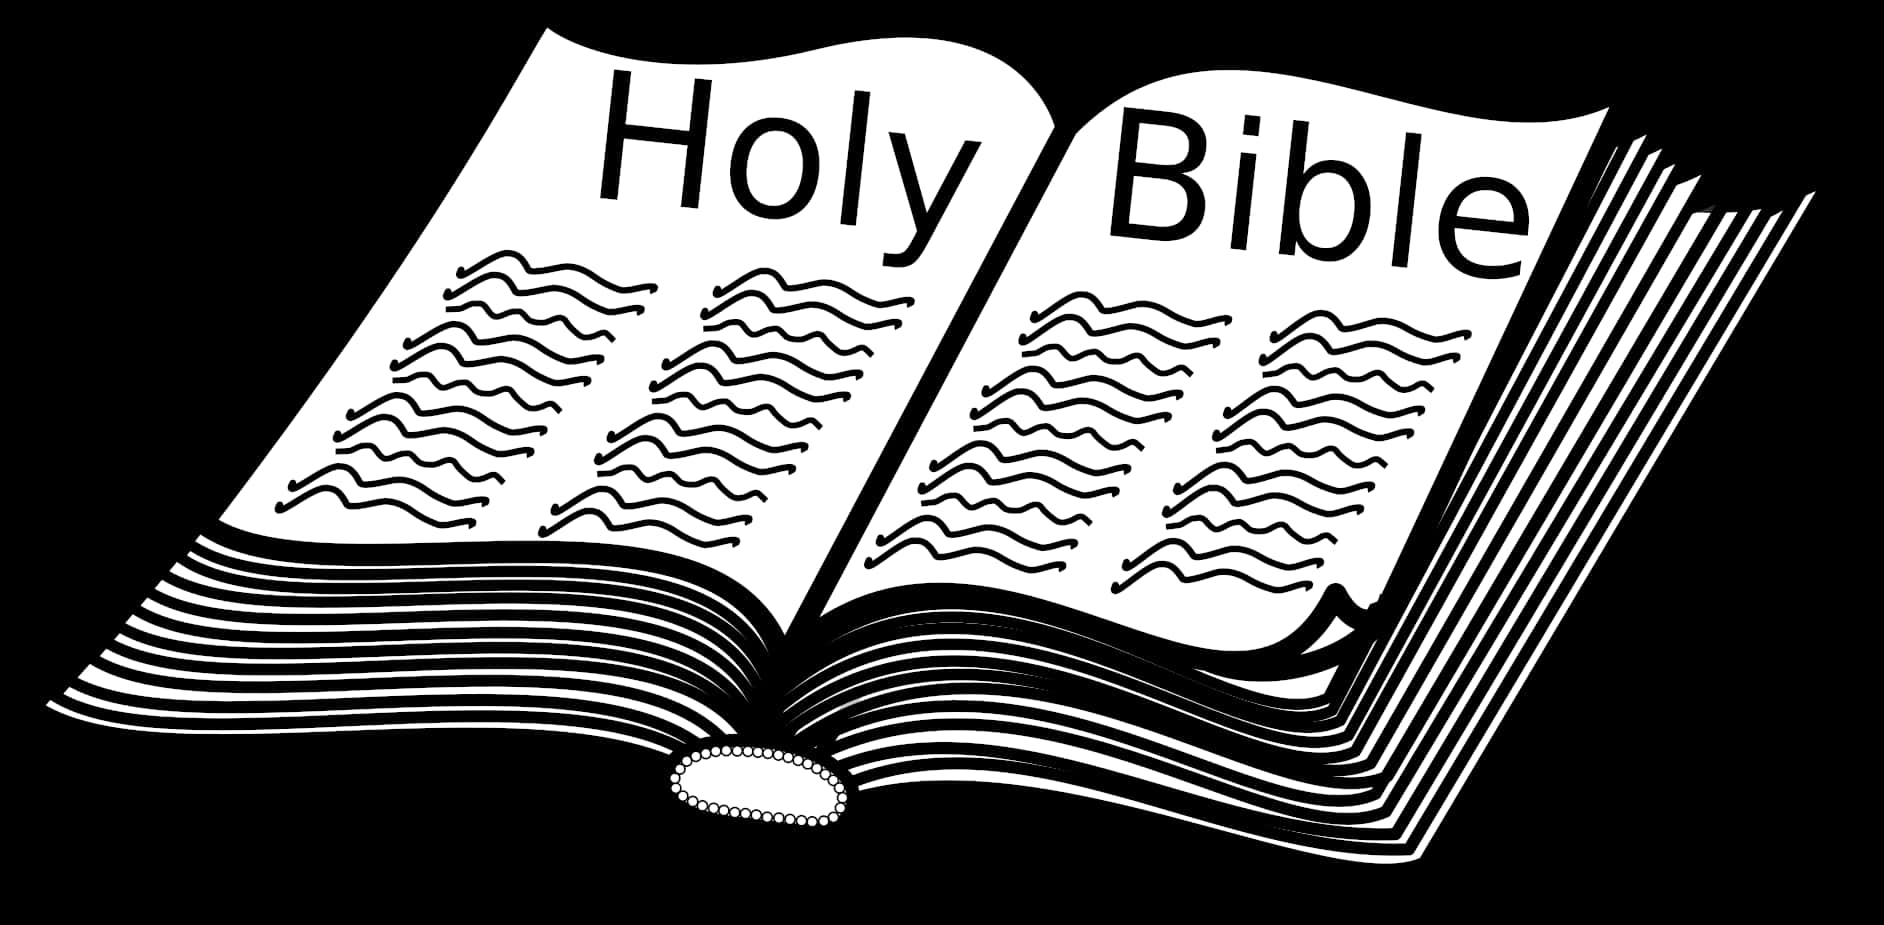 Download Open Holy Bible Graphic | Wallpapers.com